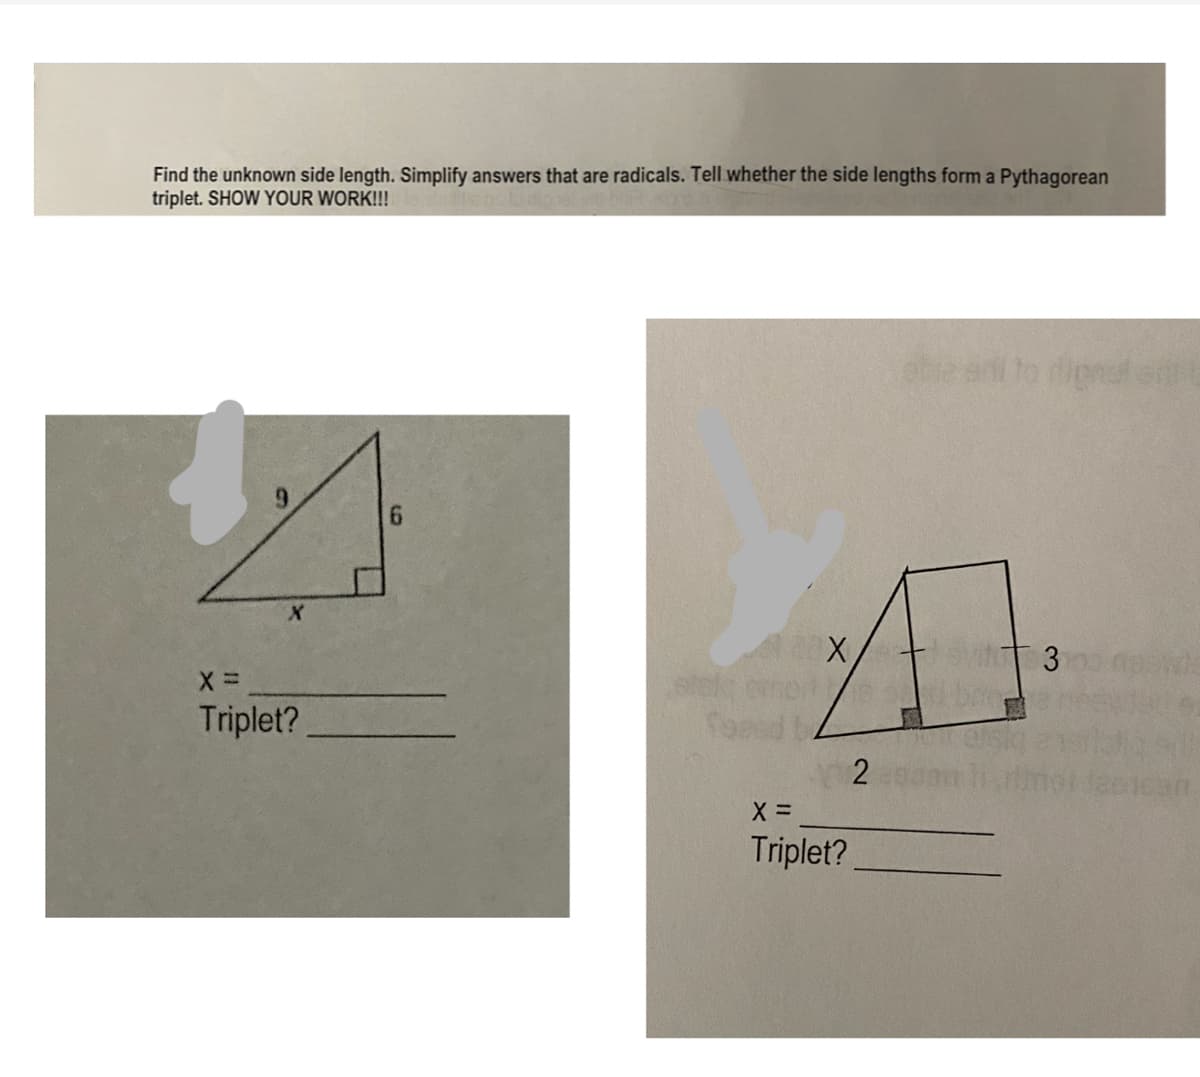 Find the unknown side length. Simplify answers that are radicals. Tell whether the side lengths form a Pythagorean
triplet. SHOW YOUR WORK!!!
dignsten
Triplet?
an
Triplet?
